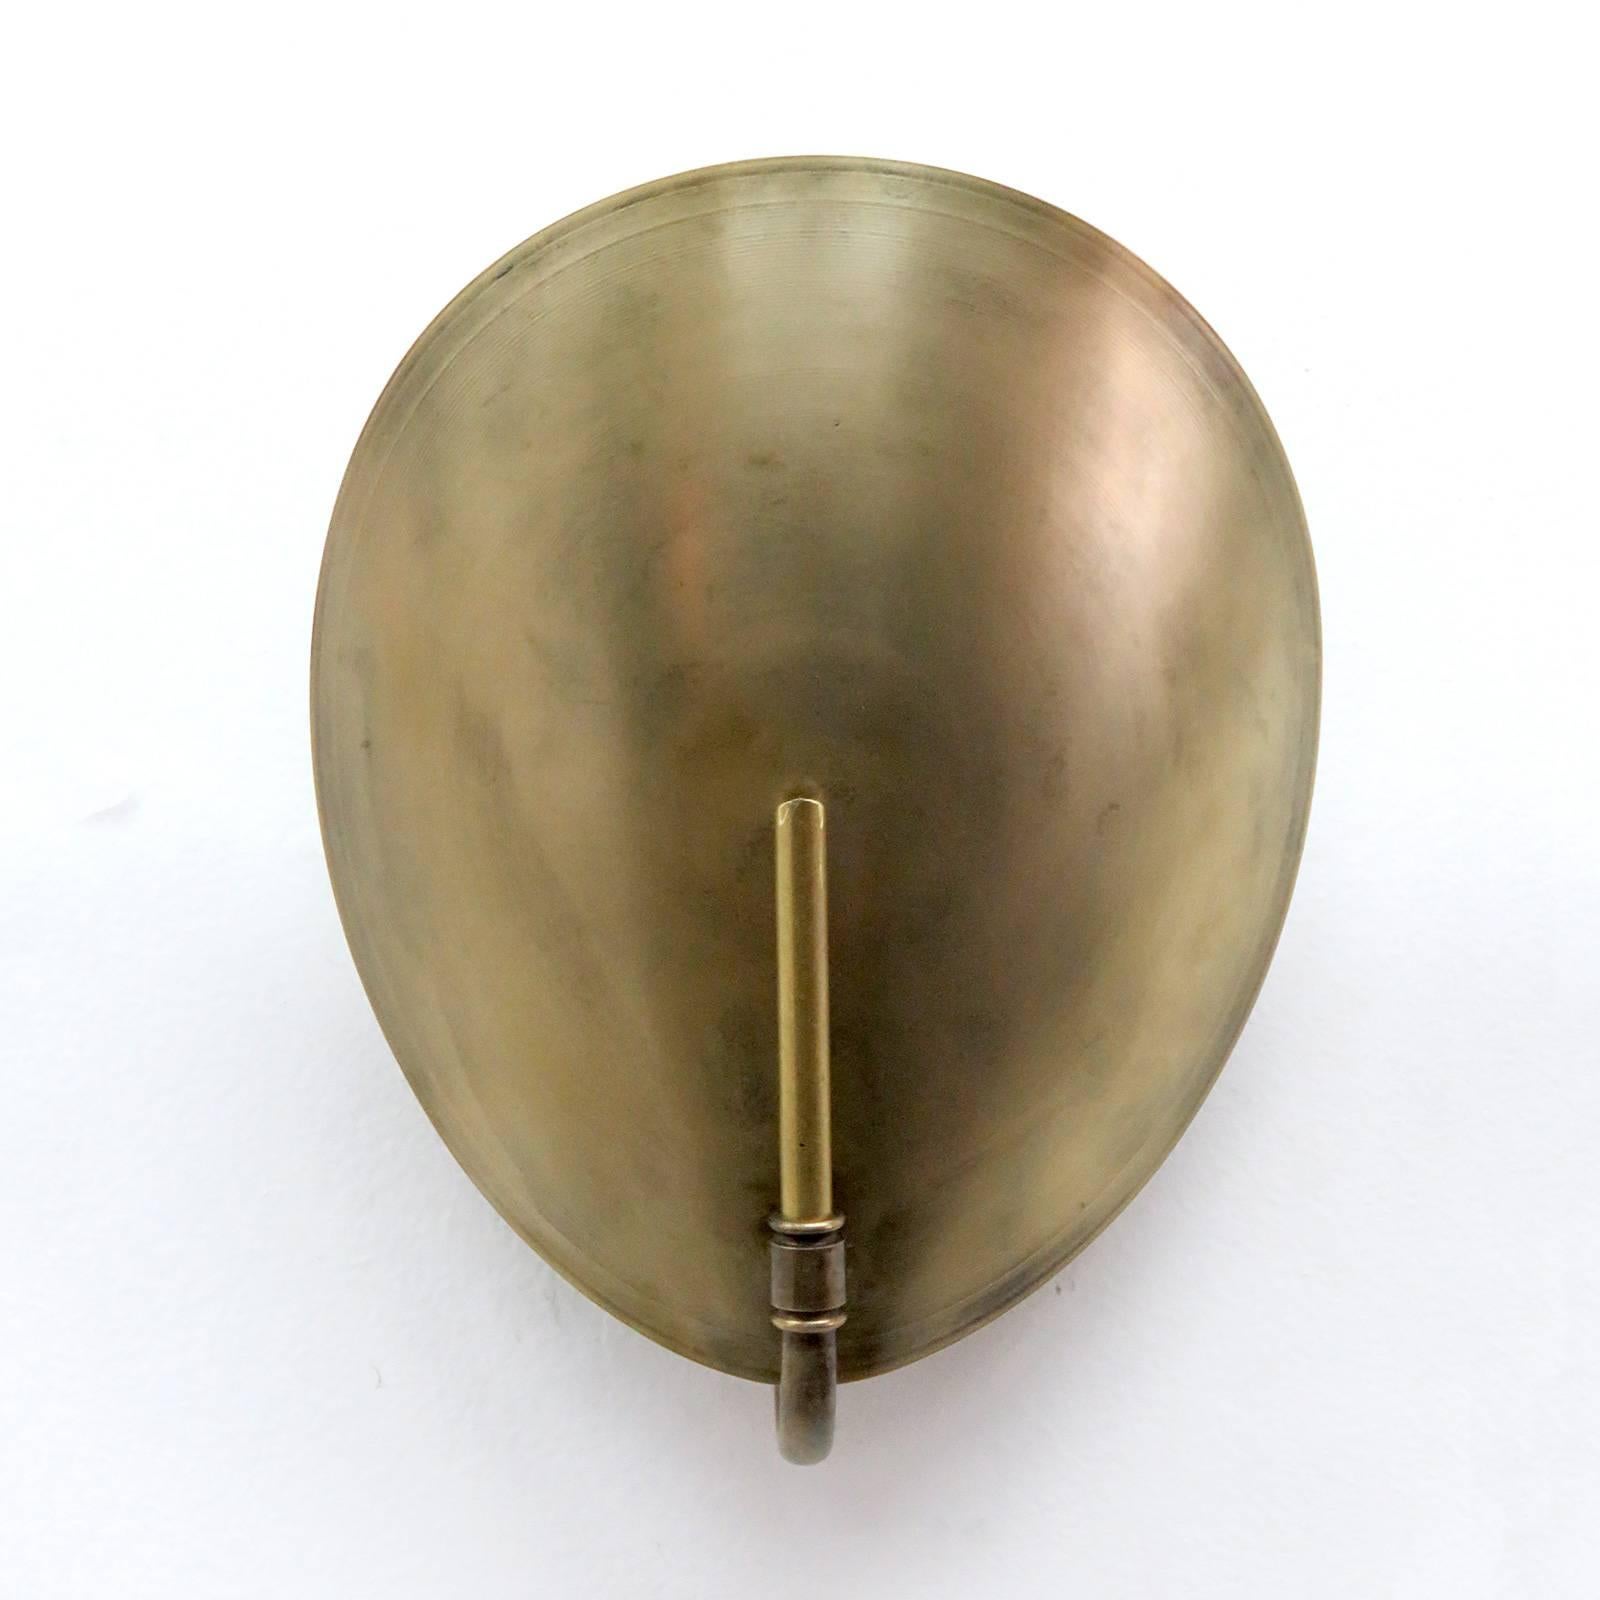 Wonderful small-scale, aged brass wall lights by Gallery L7, handcrafted and finished in Los Angeles from American brass, also available with individual on/off pull switch, one E26 socket per fixture, max. wattage 75w each or 3-7w LED equivalent,